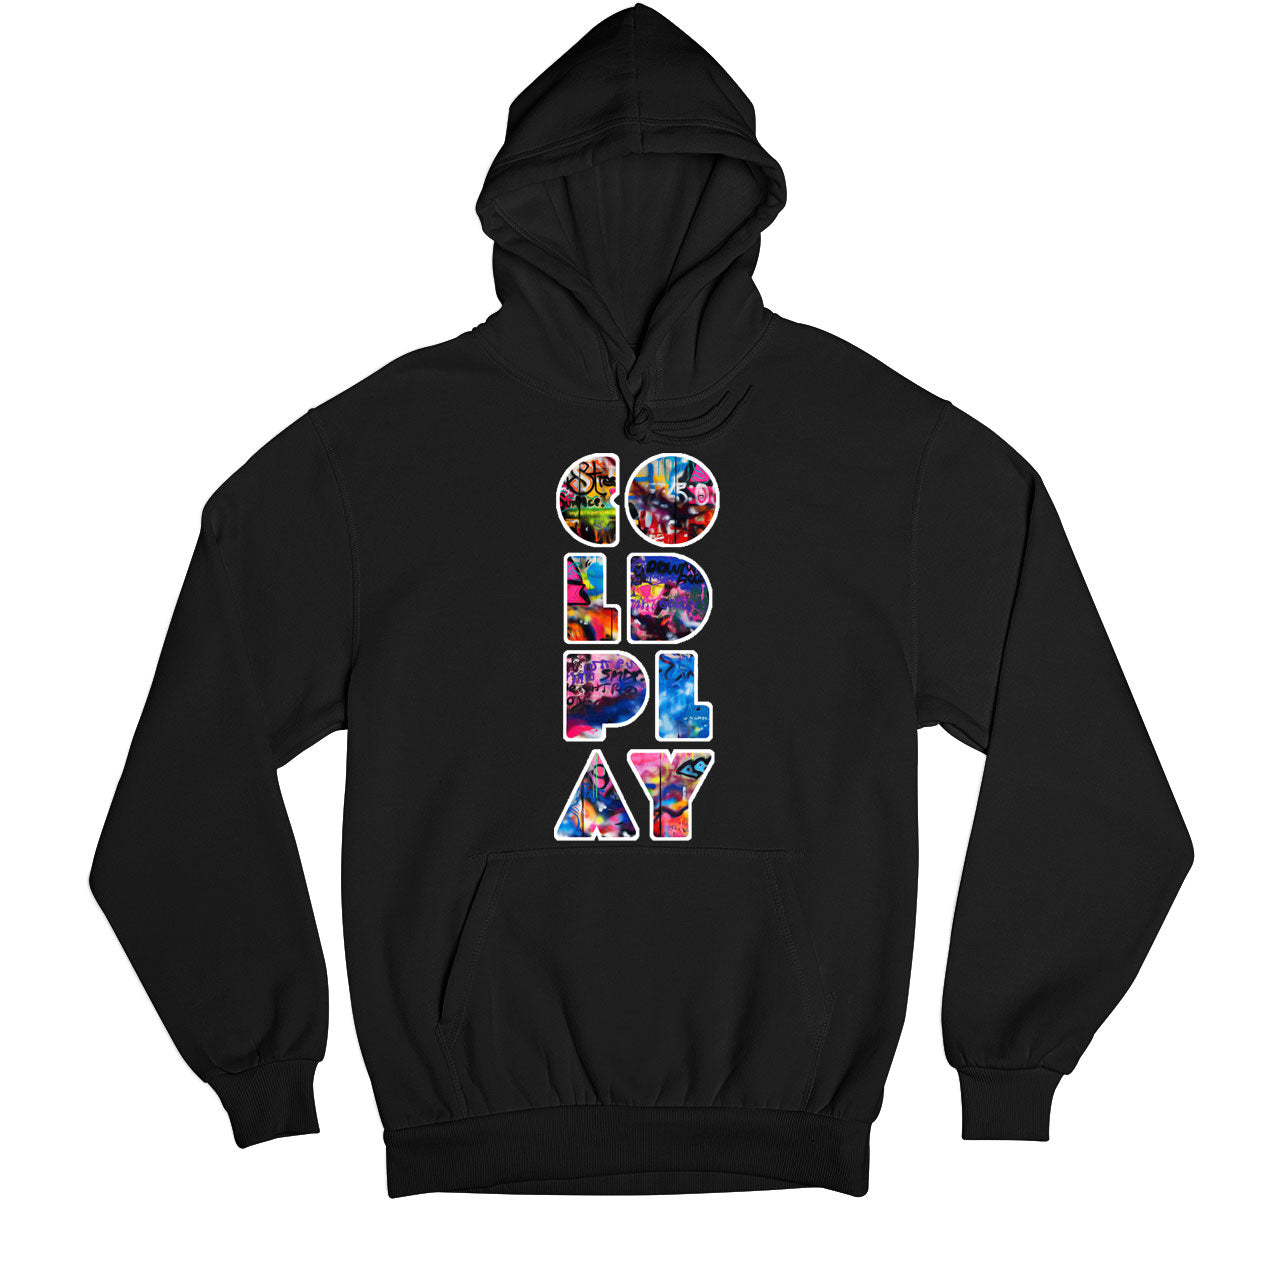 Coldplay Hoodie - On Sale - 3XL (Chest size 50 IN)